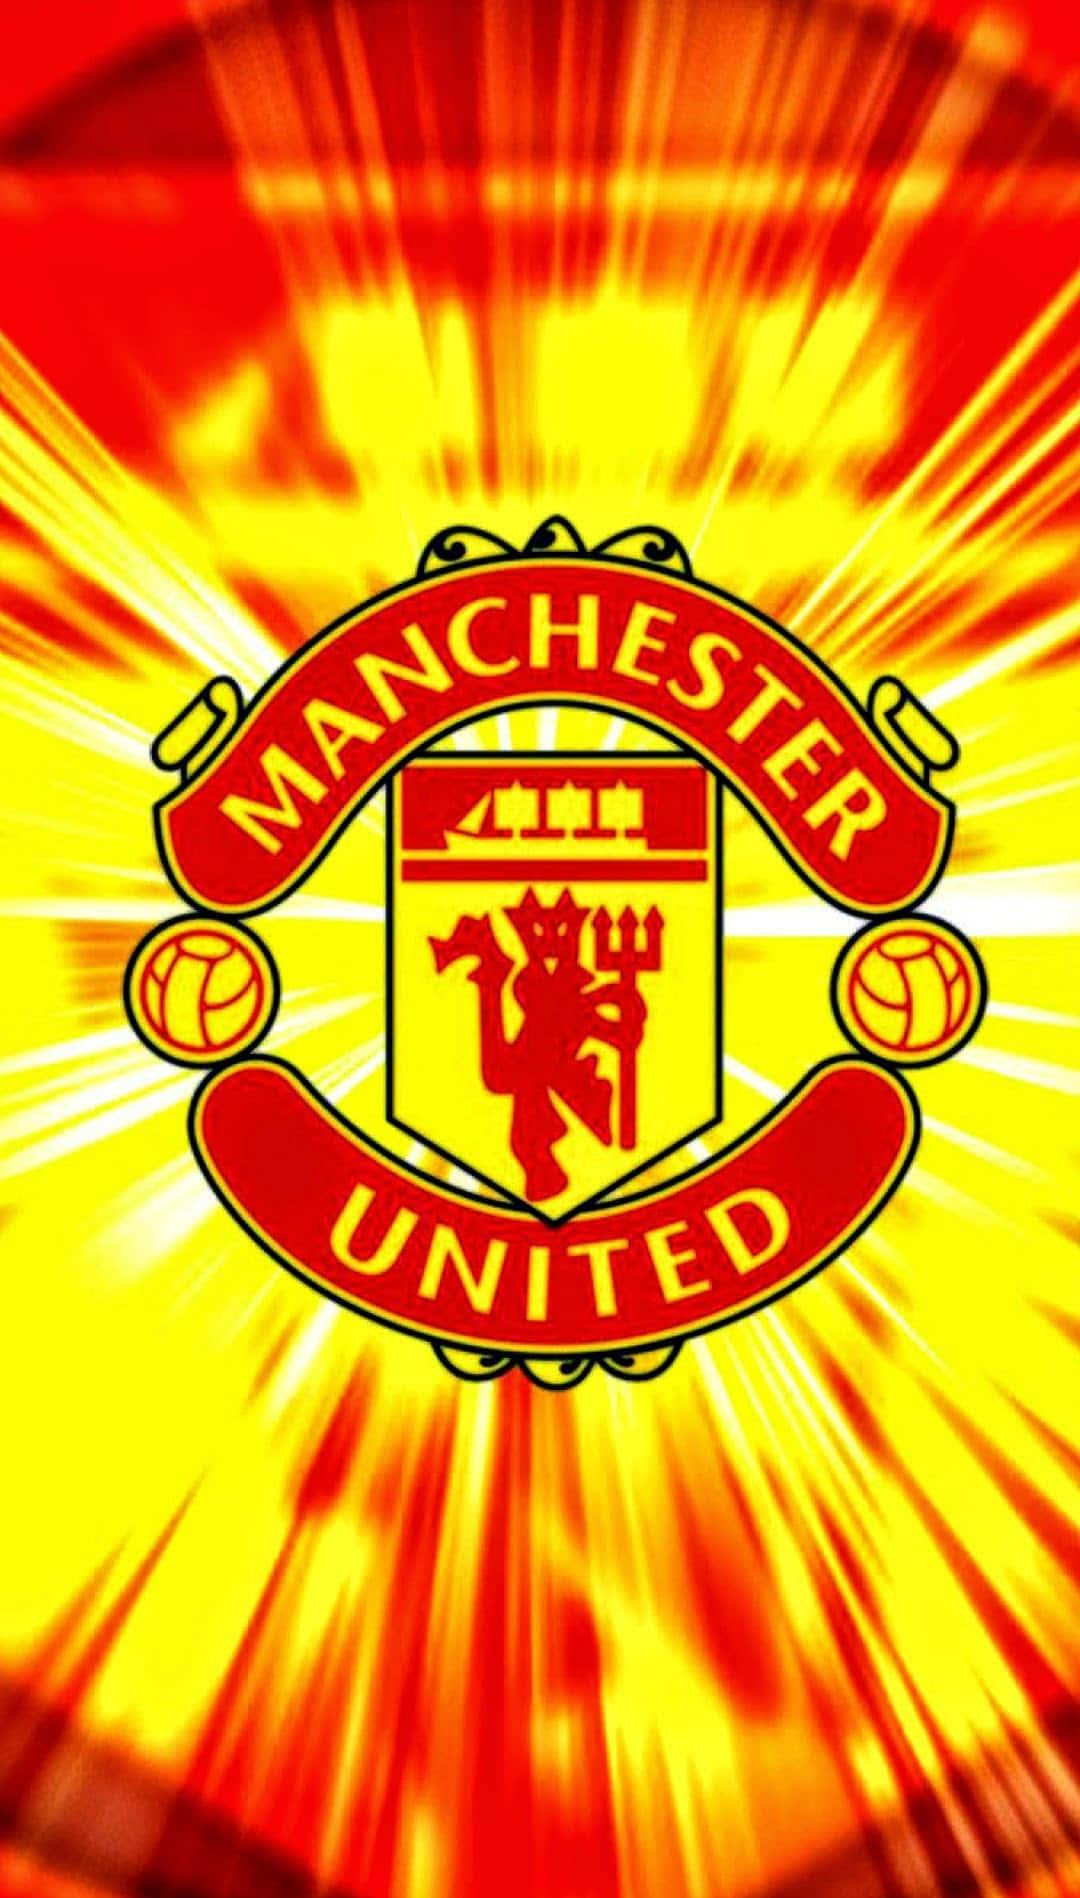 This Manchester United iPhone Wallpaper